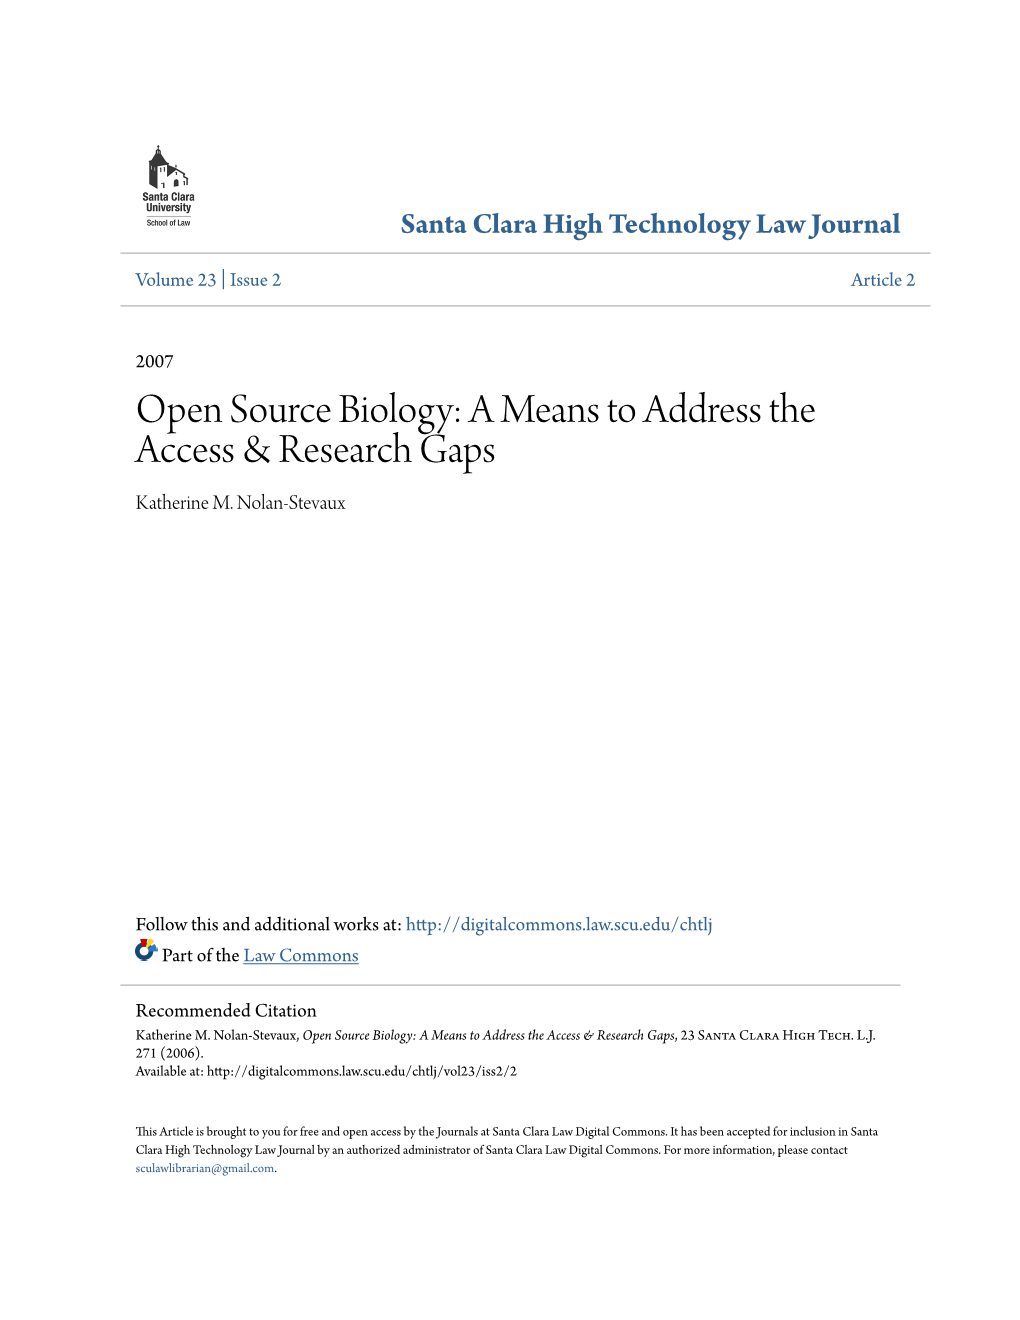 Open Source Biology: a Means to Address the Access & Research Gaps